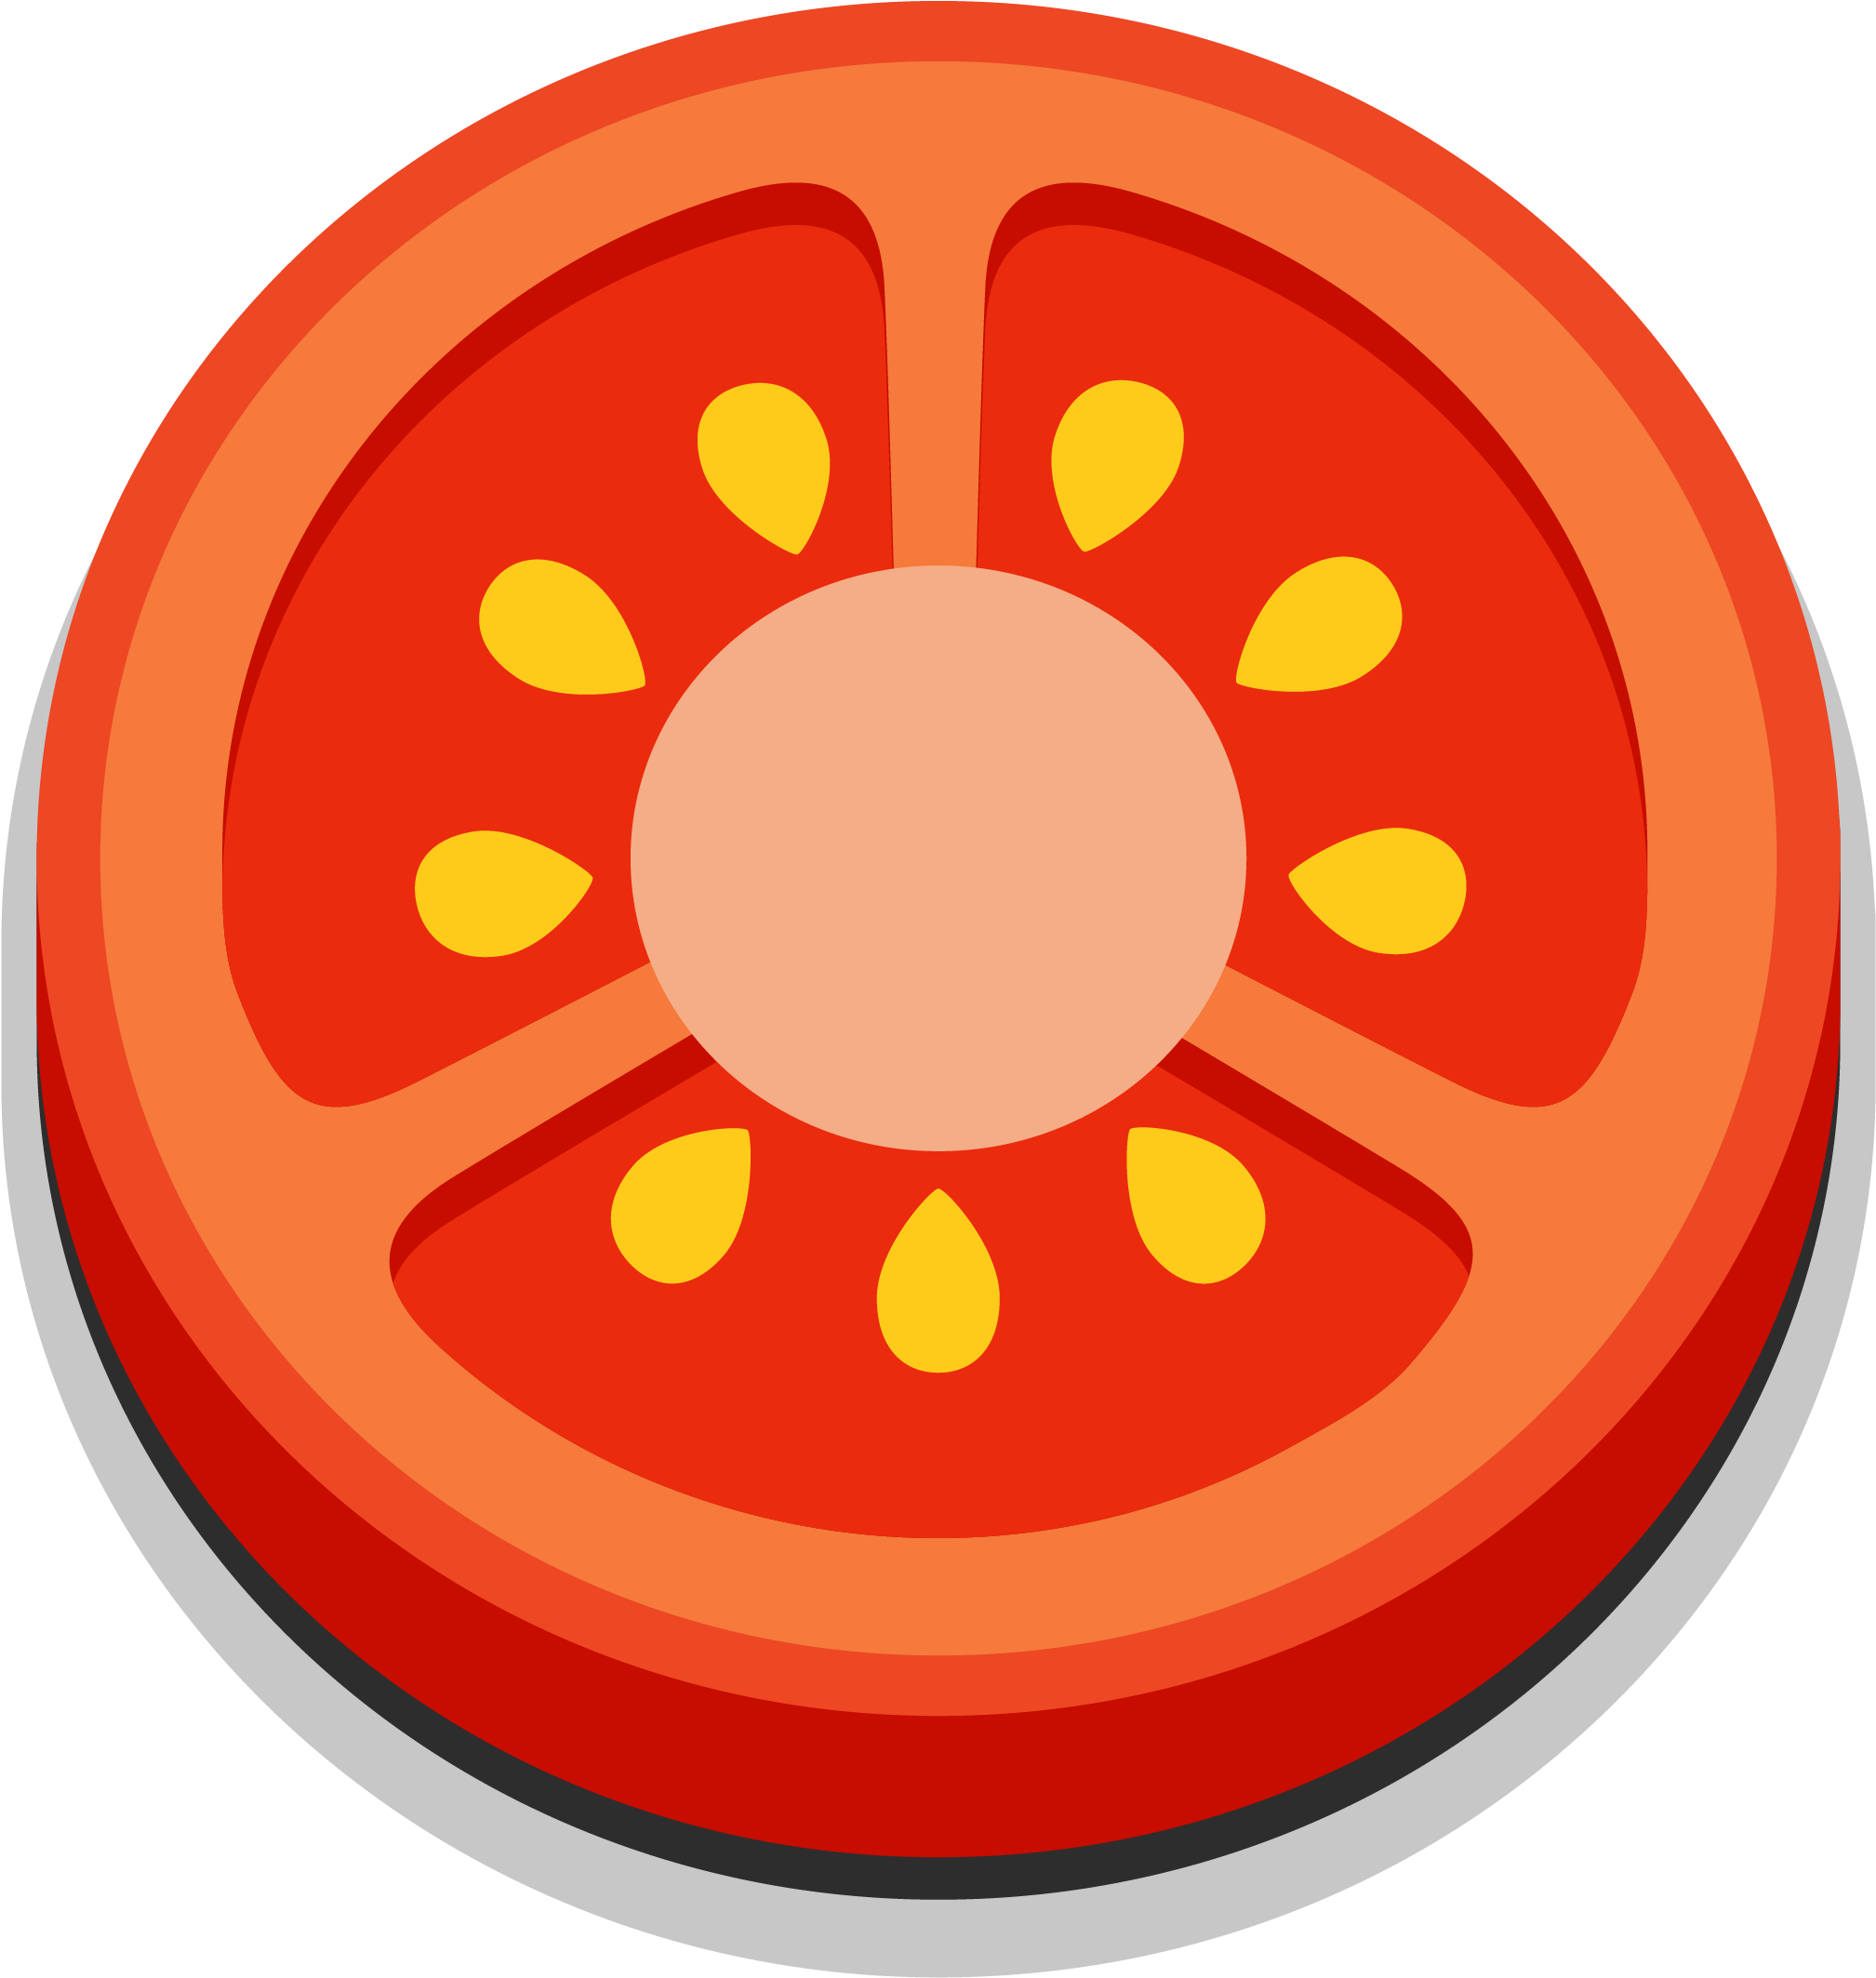 Cherry Tomato Vegetable Fruit Onion - Cartoon Tomato Slice Png (2519x2663), Png Download